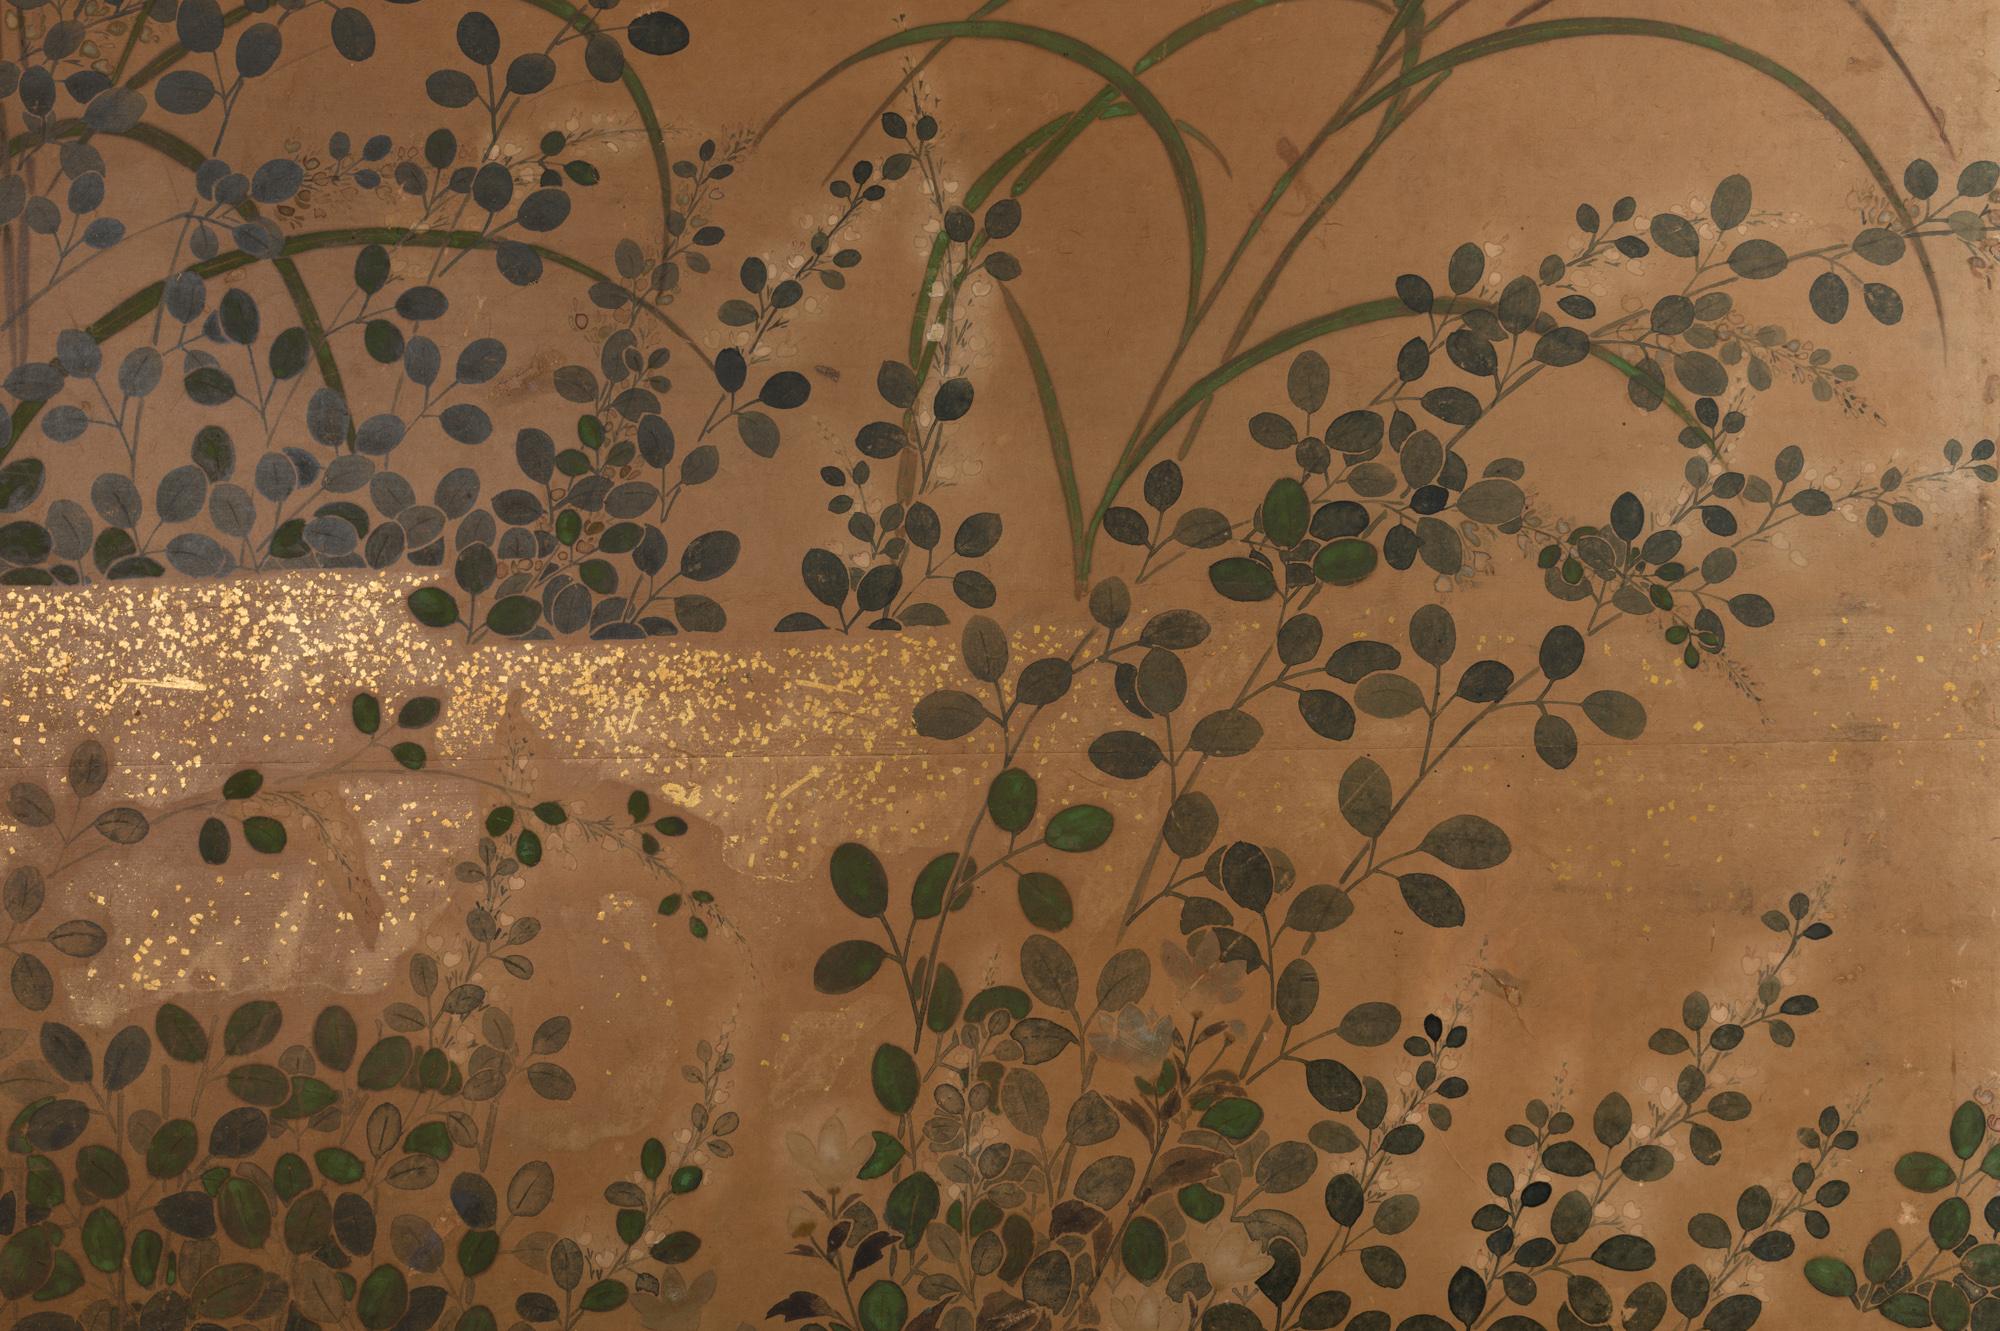 Japanese two-panel screen: Rimpa floral landscape. Late Edo period (early 19th century) soft painting of wild flowers (including bushclover, thistles, and bellflower) and grasses painted in mineral pigments on paper with gold dust. Mounted with 19th